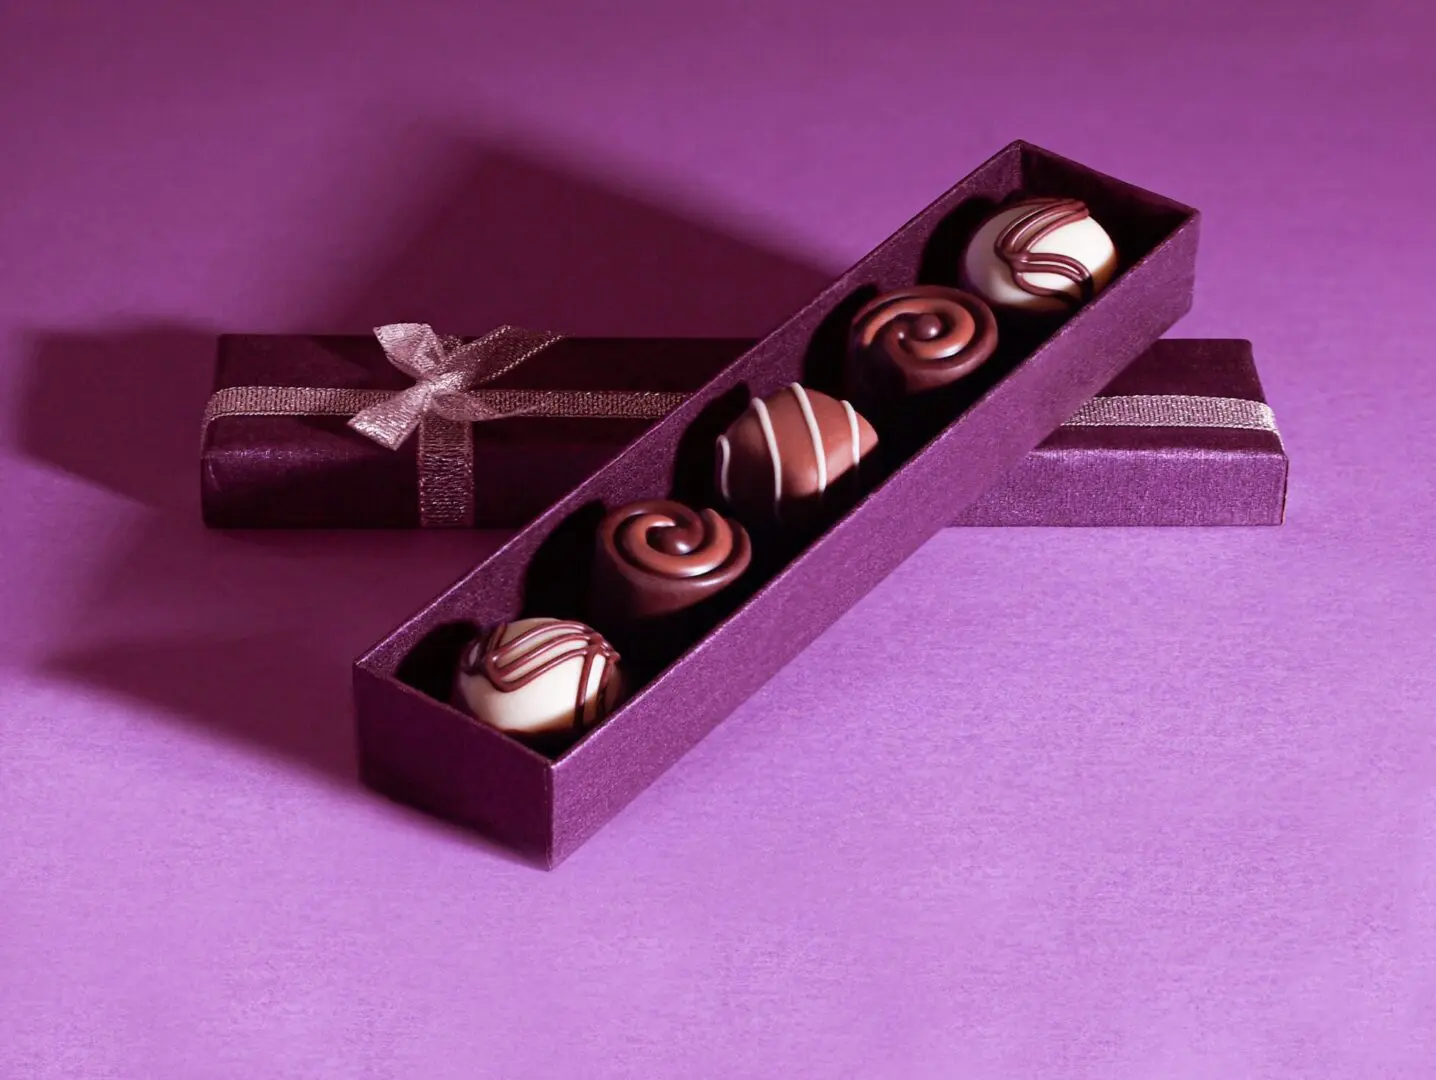 Four chocolates in a purple box on a purple background.